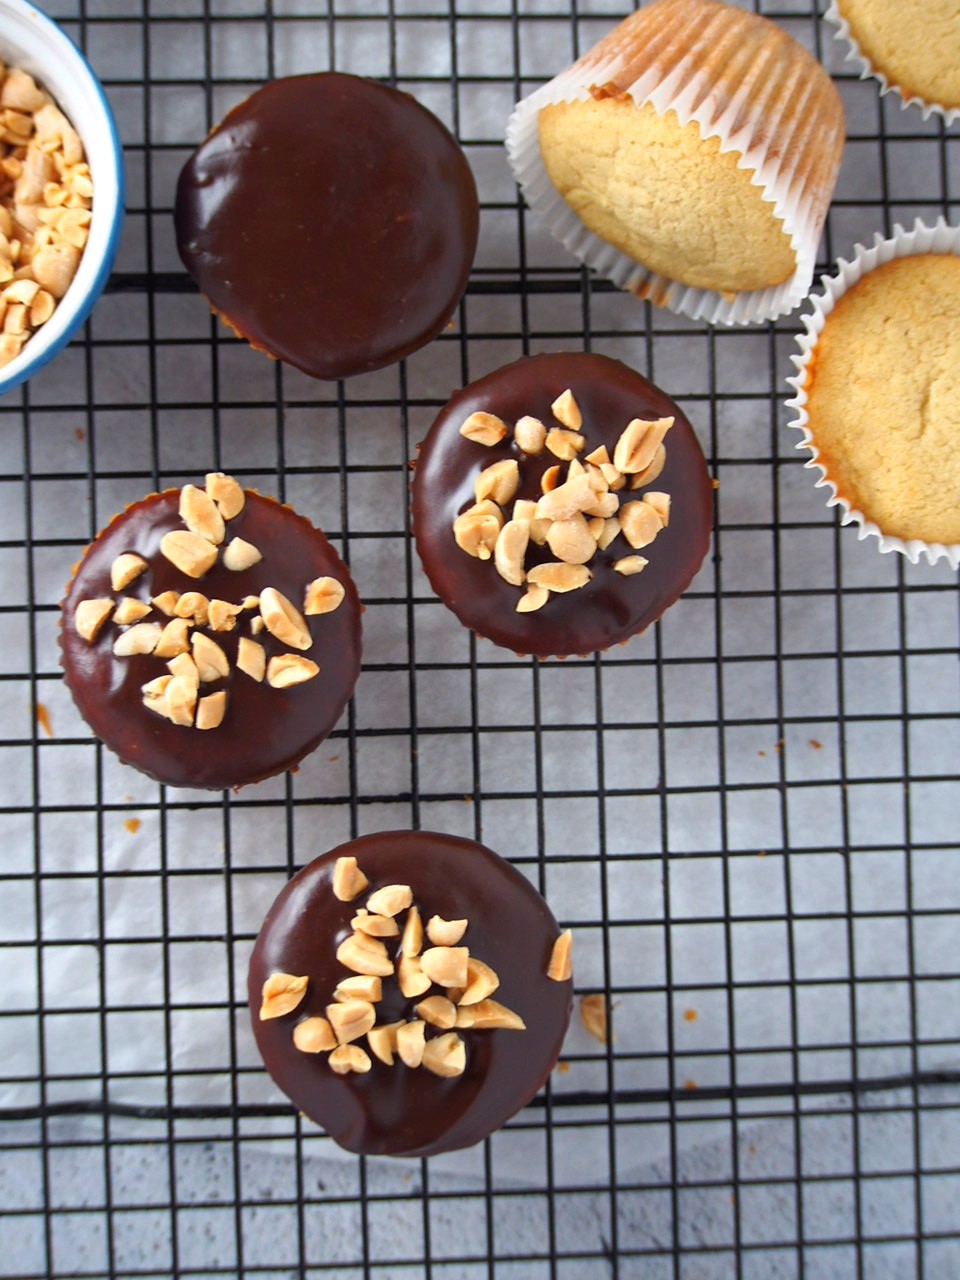 Peanut butter cupcakes on a wire rack, glazed with chocolate and top with peanuts.